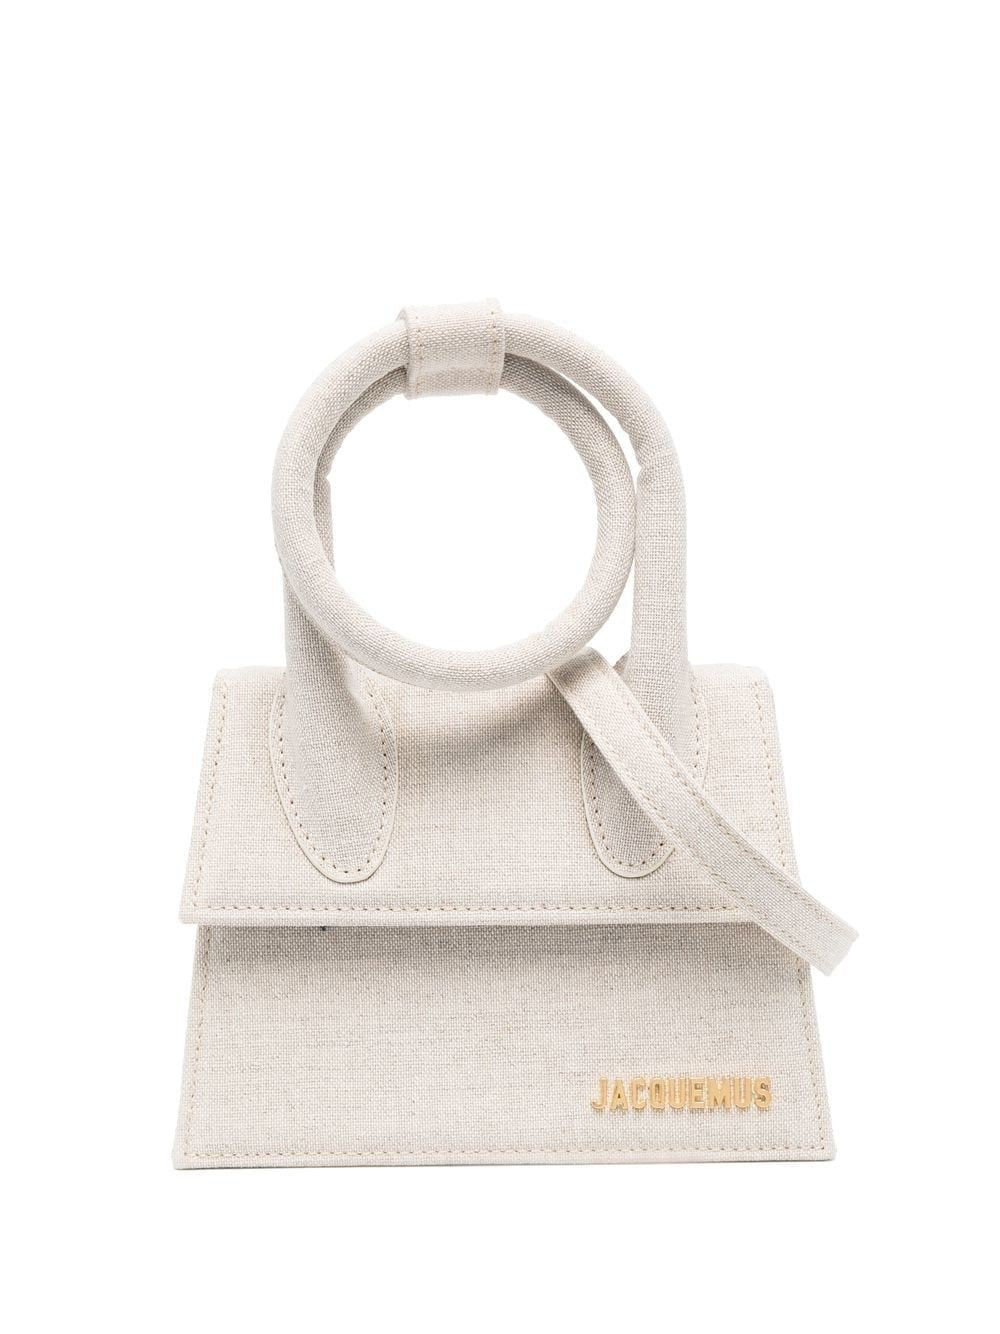 JACQUEMUS Light Grey Mini Bag with Knot Detail for Women